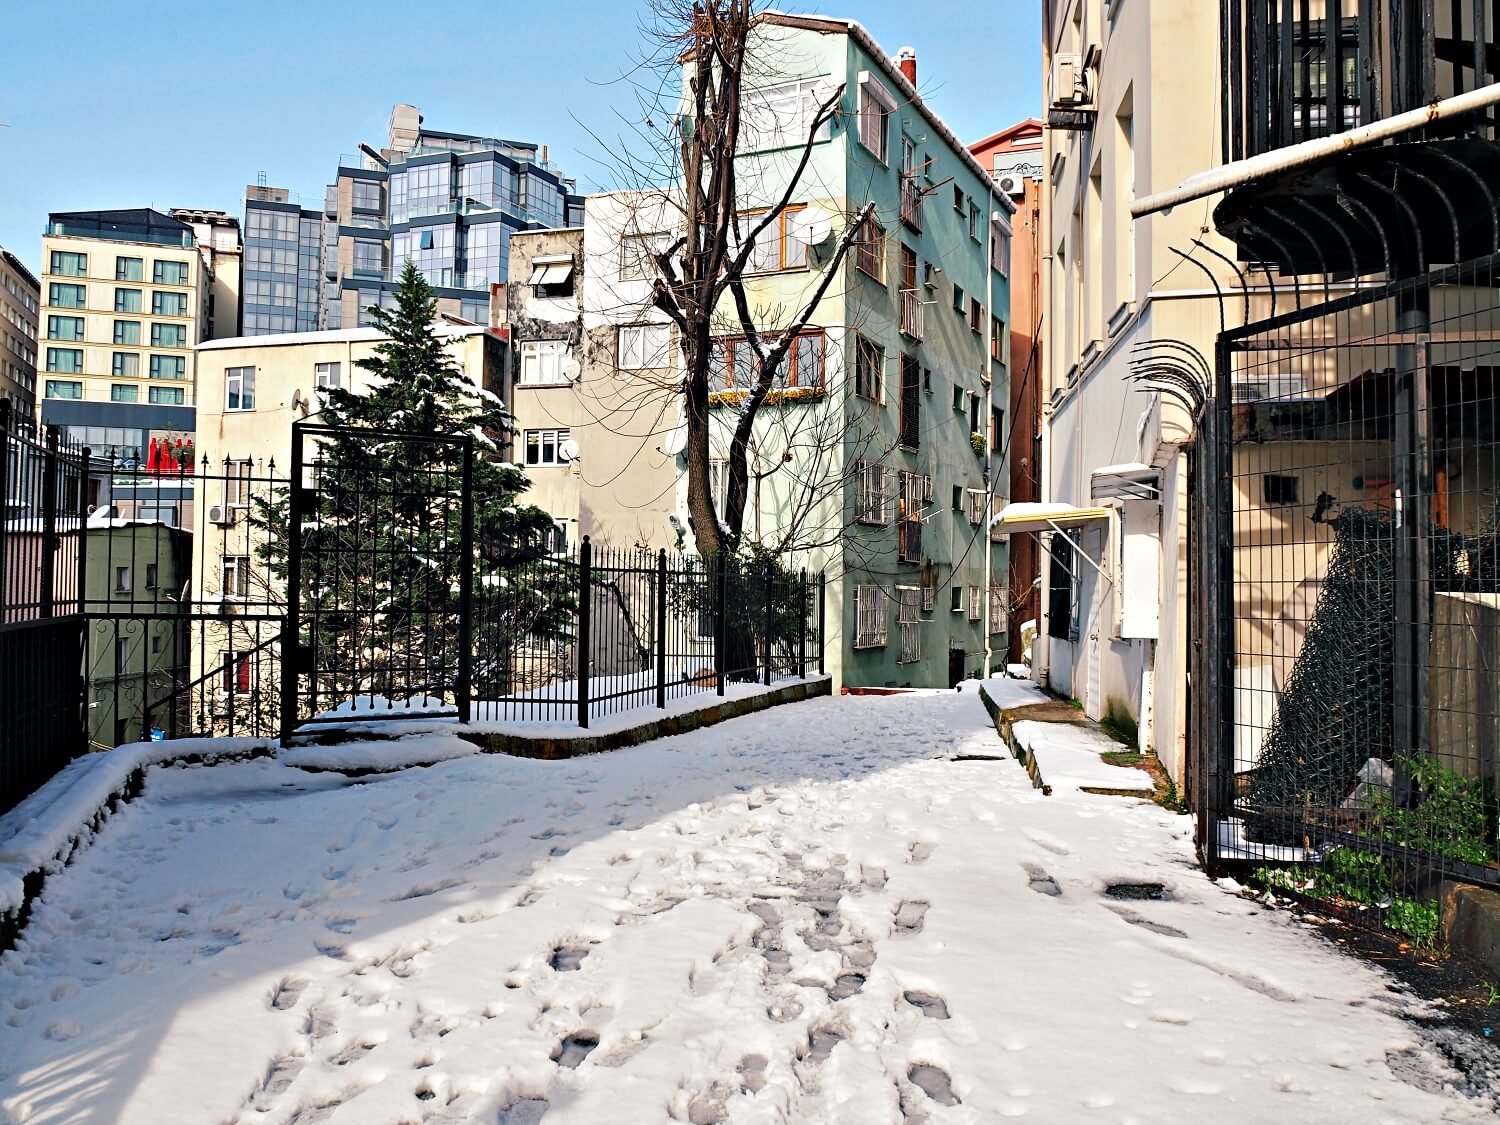 Snow on the ground in winter in Istanbul 2021